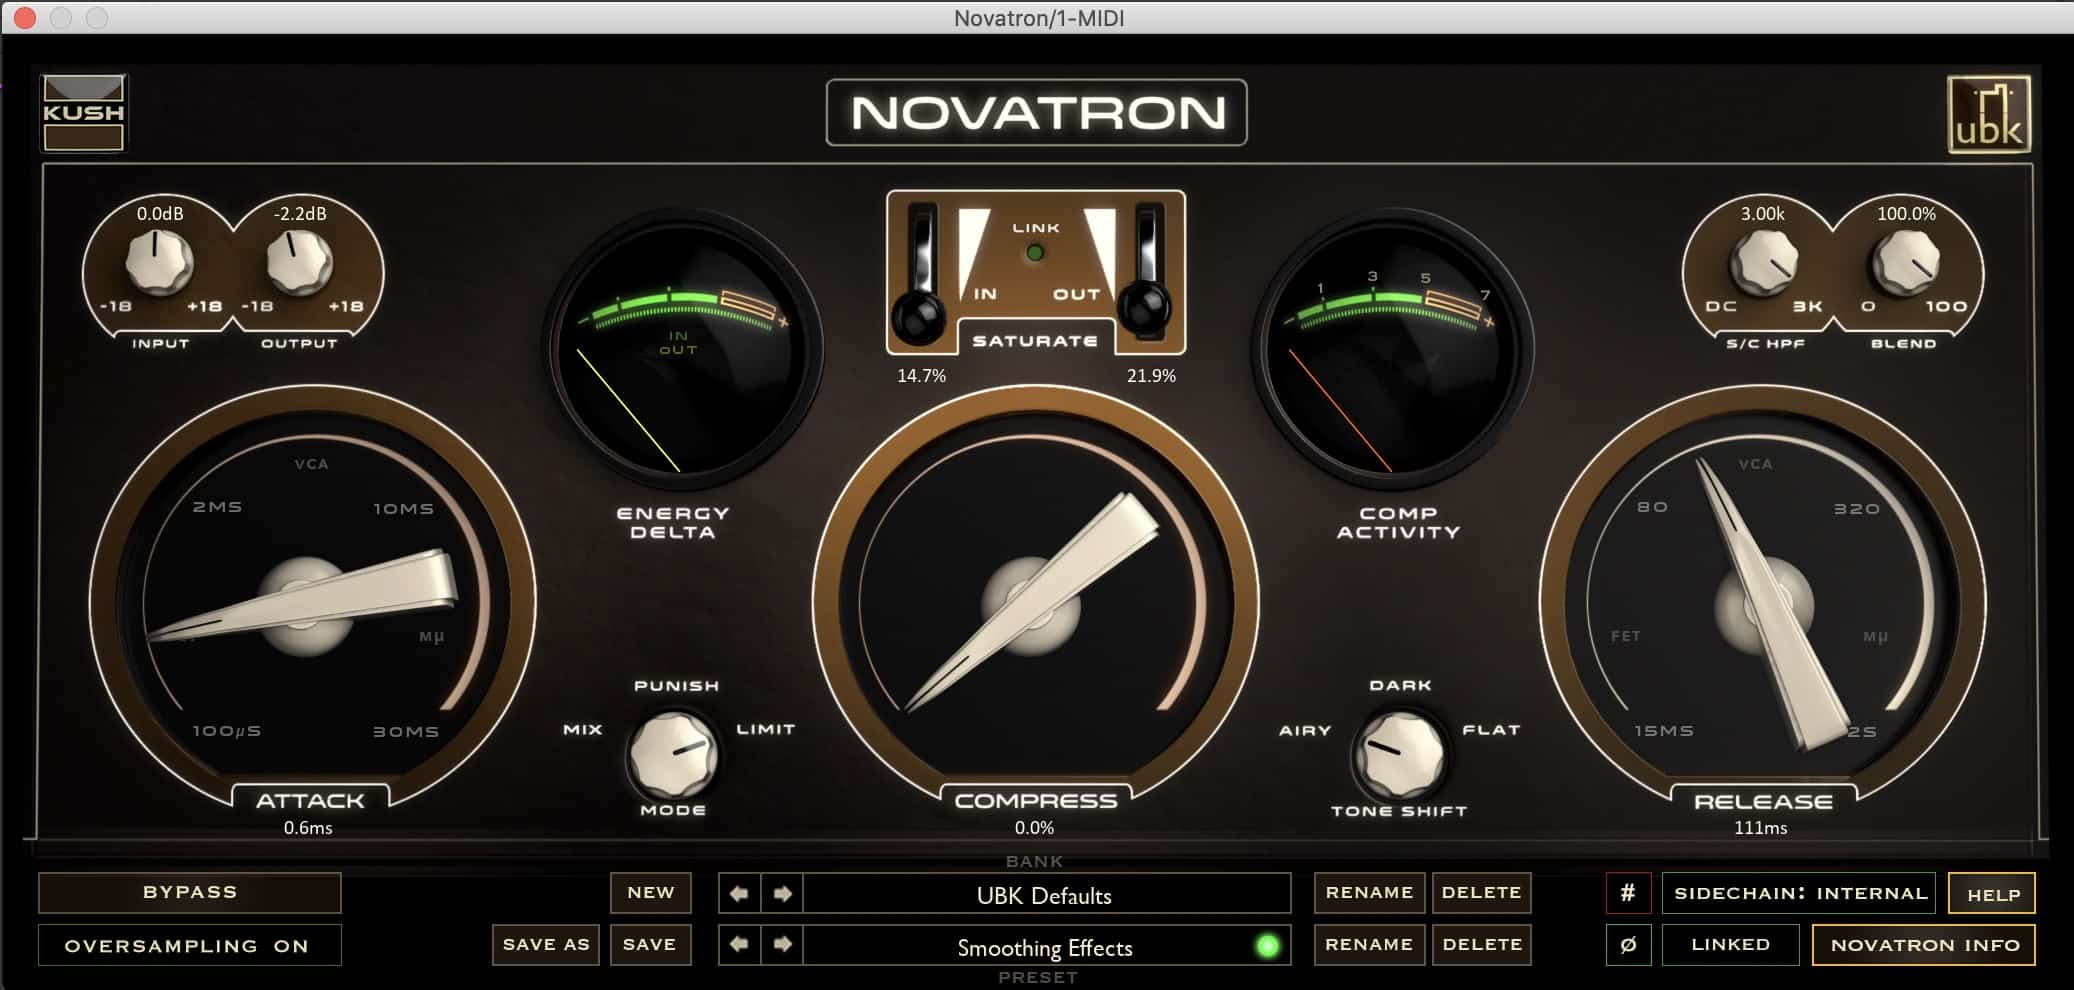 Novatron VERSION 1.0.11 is HERE - Sweetest, Lush and Classic Vibe Compressor by The House of Kush